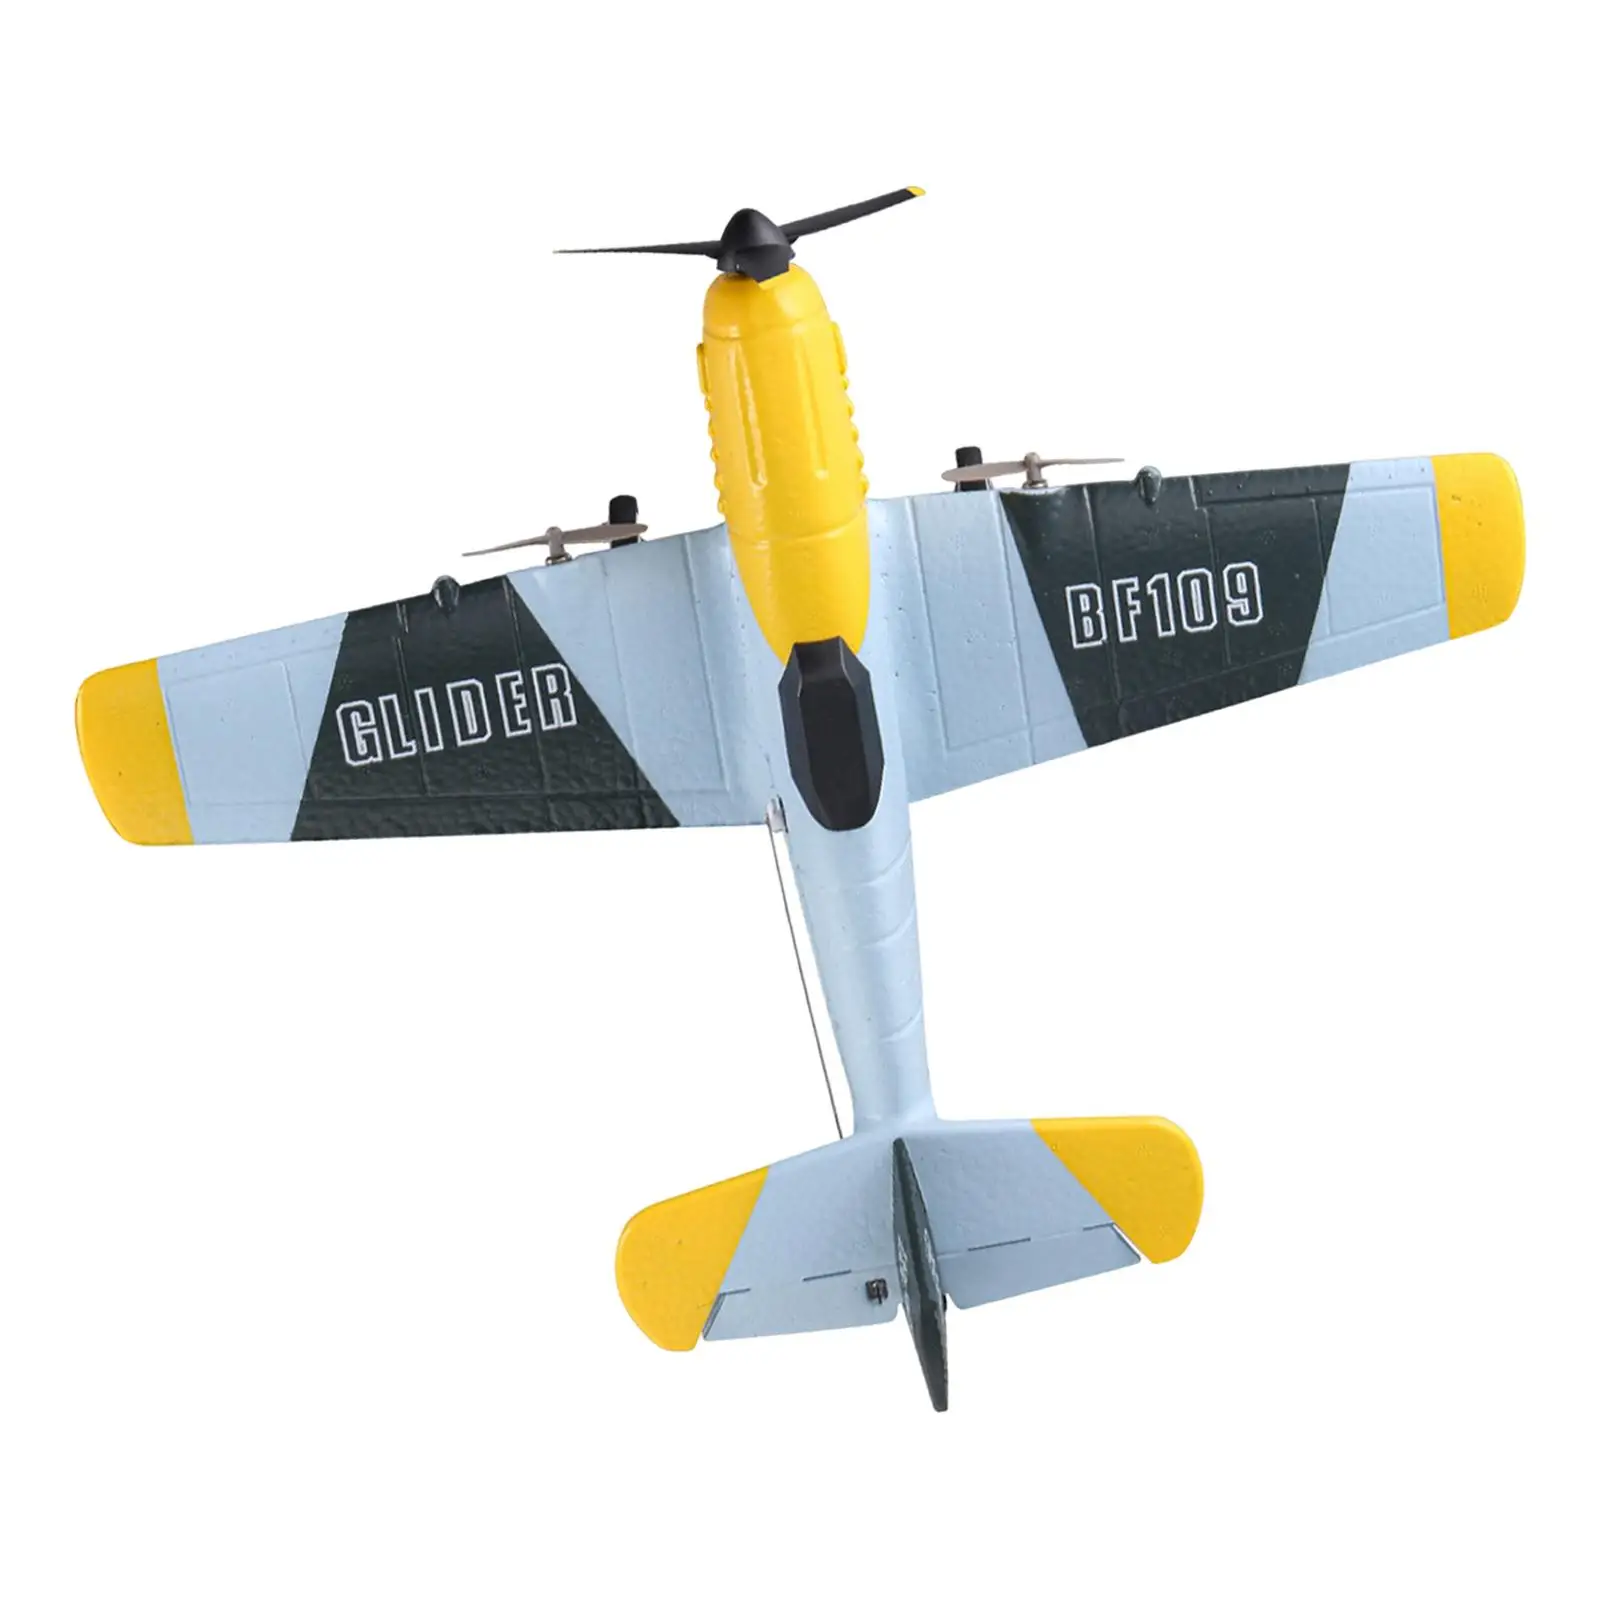 RC Planes 2.4G Lightweight Gift RC Glider Aircraft RC Aircraft Jet Easy to Fly for Beginner Adults Kids Boys Girls